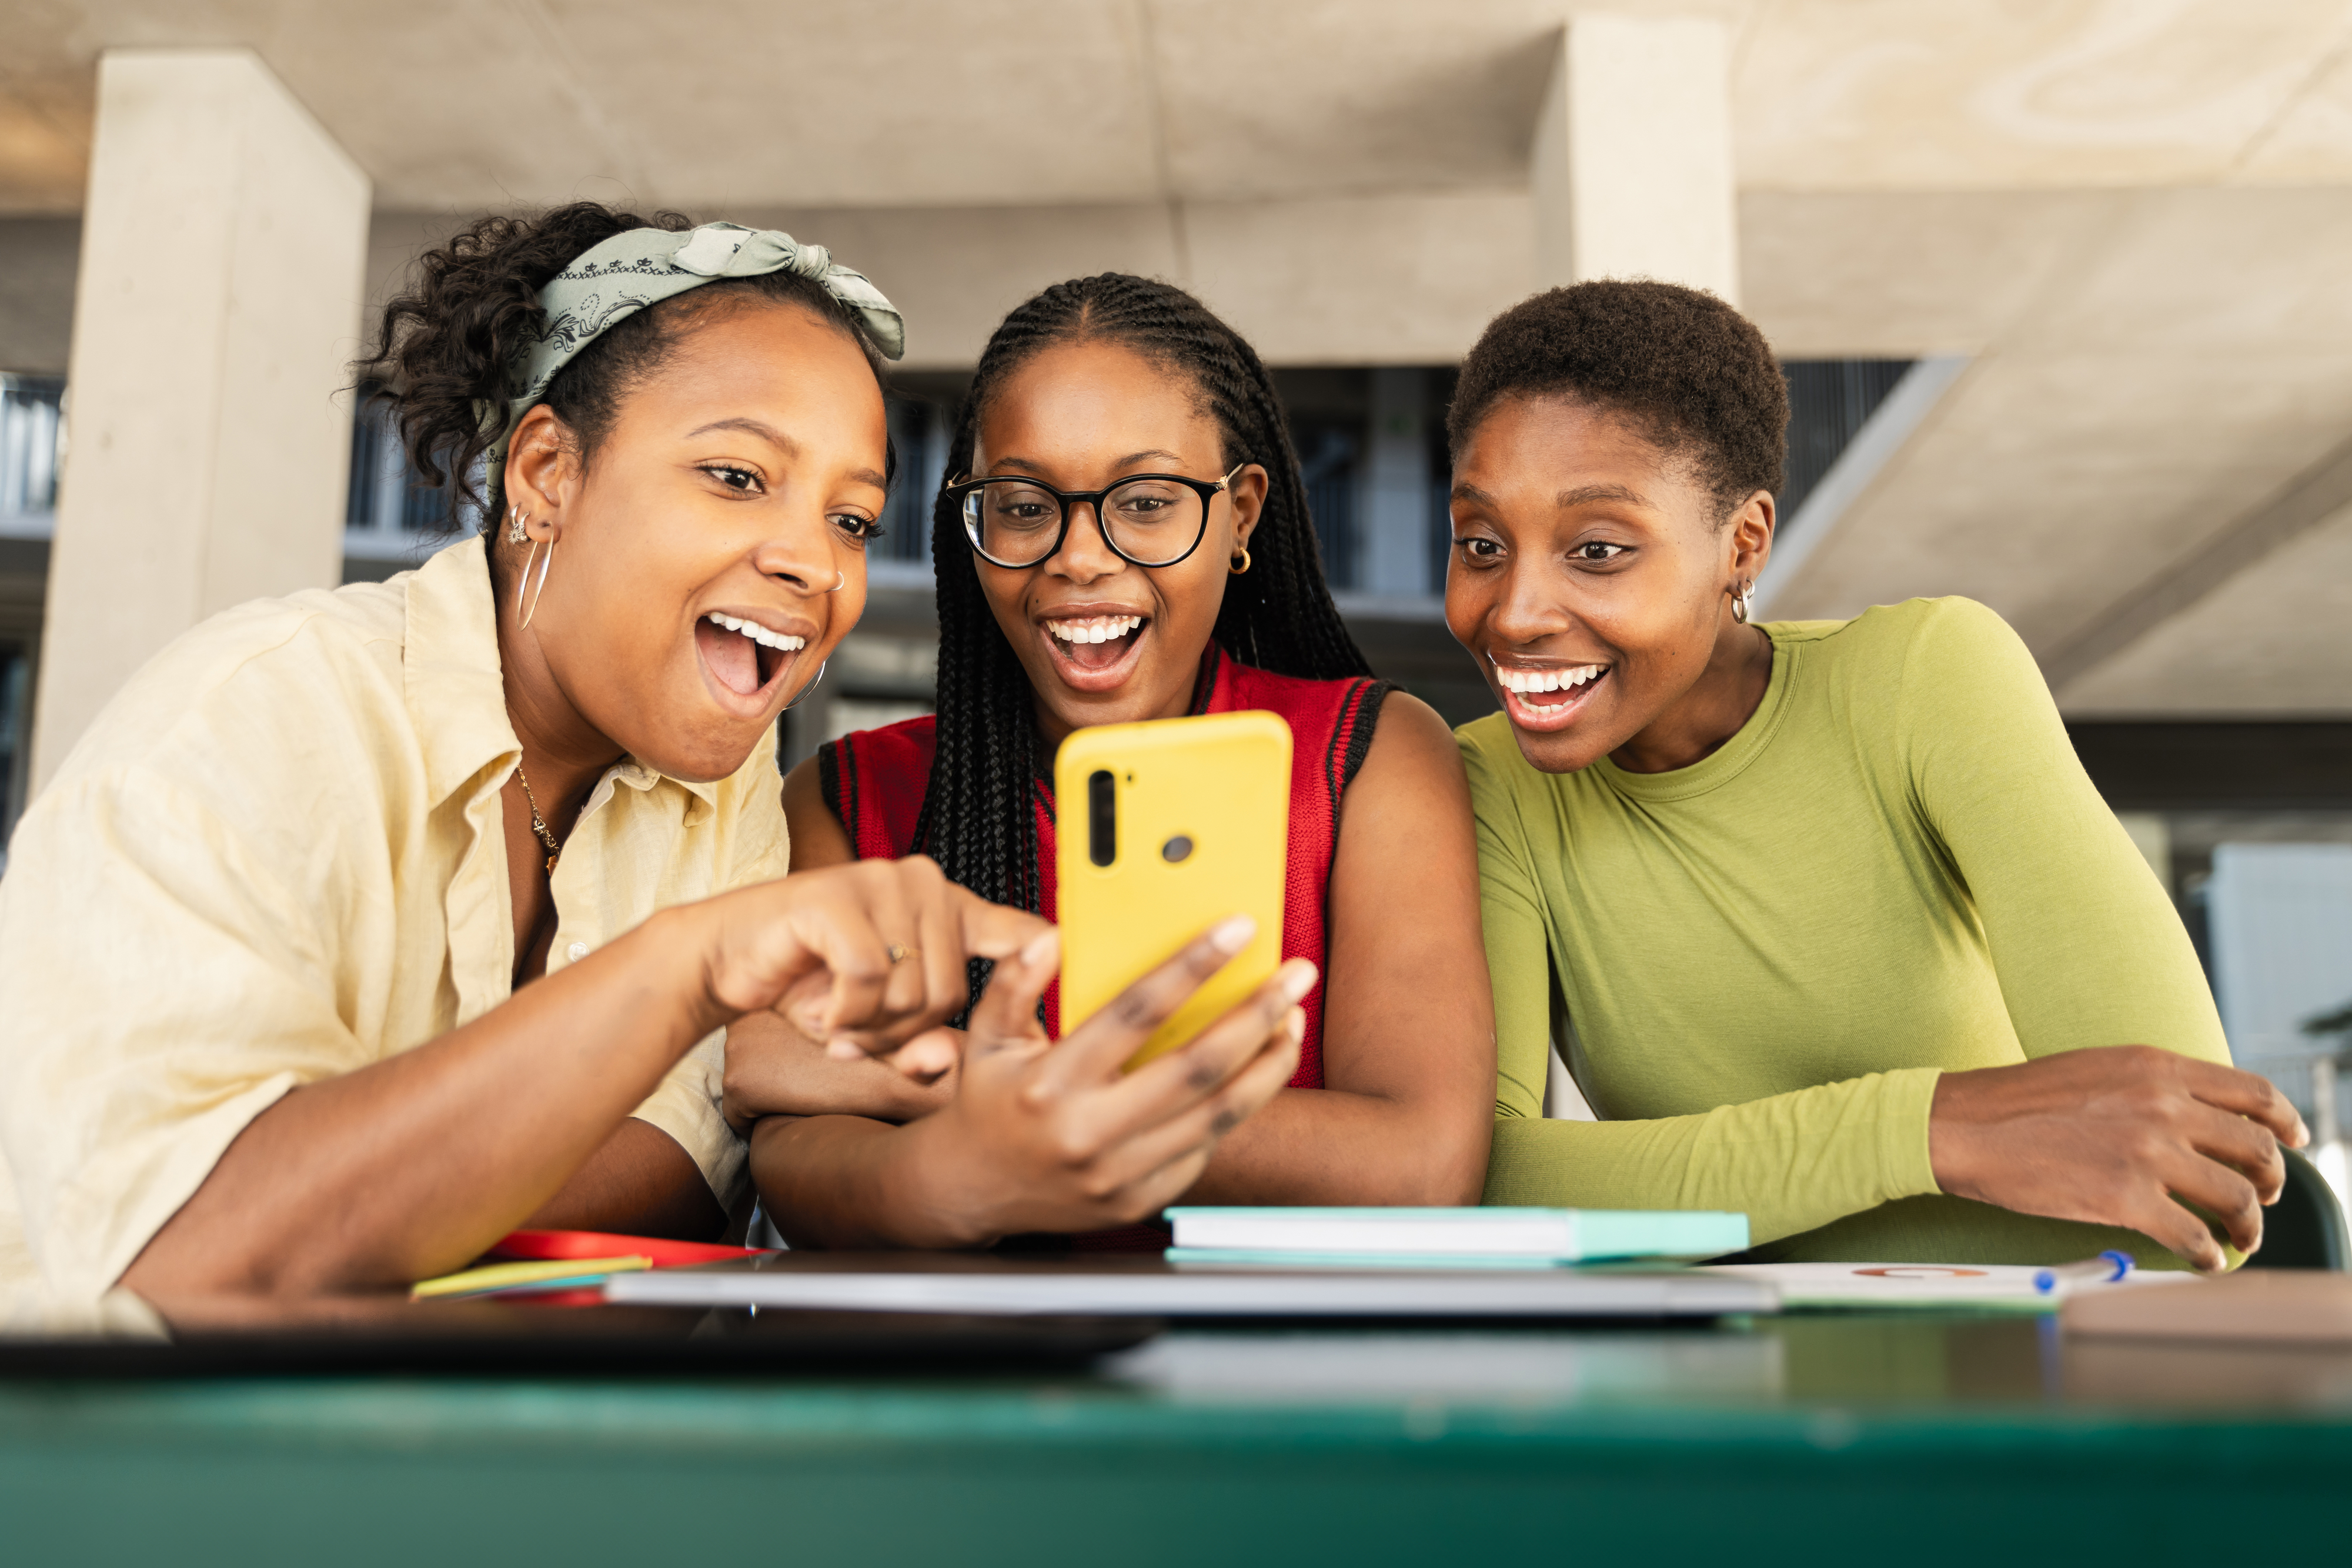 Three women smiling at a smartphone together, possibly reviewing work content or financial data